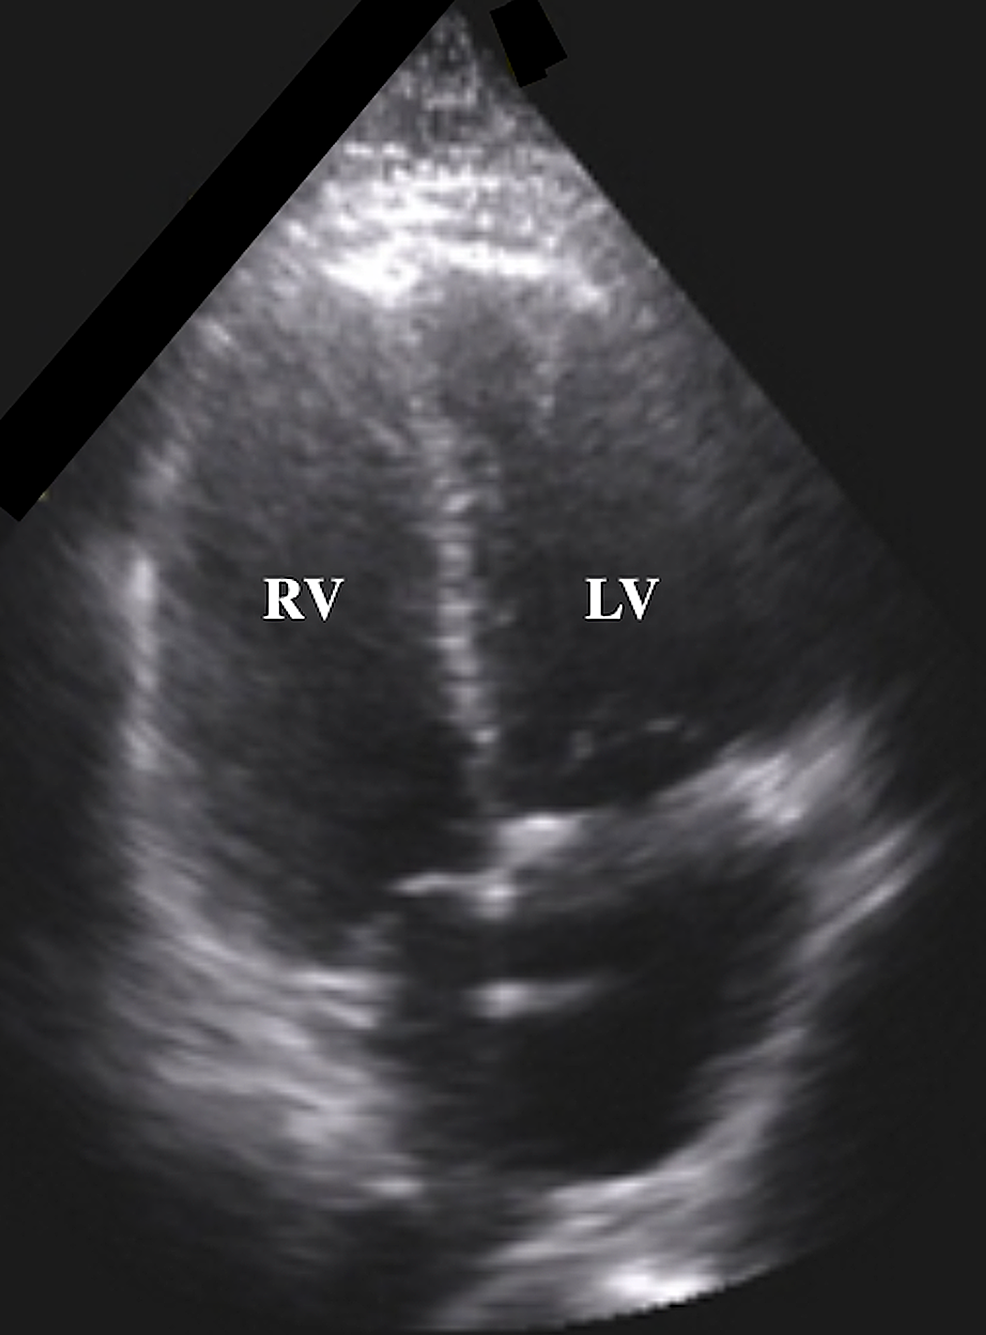 Bedside-point-of-care-ultrasound-(POCUS)-during-CPR-showed-a-dilated-RV-and-an-RV:LV-ratio-greater-than-1,-indicating-an-increase-in-RV-afterload-likely-secondary-to-a-PE-given-the-clinical-context.